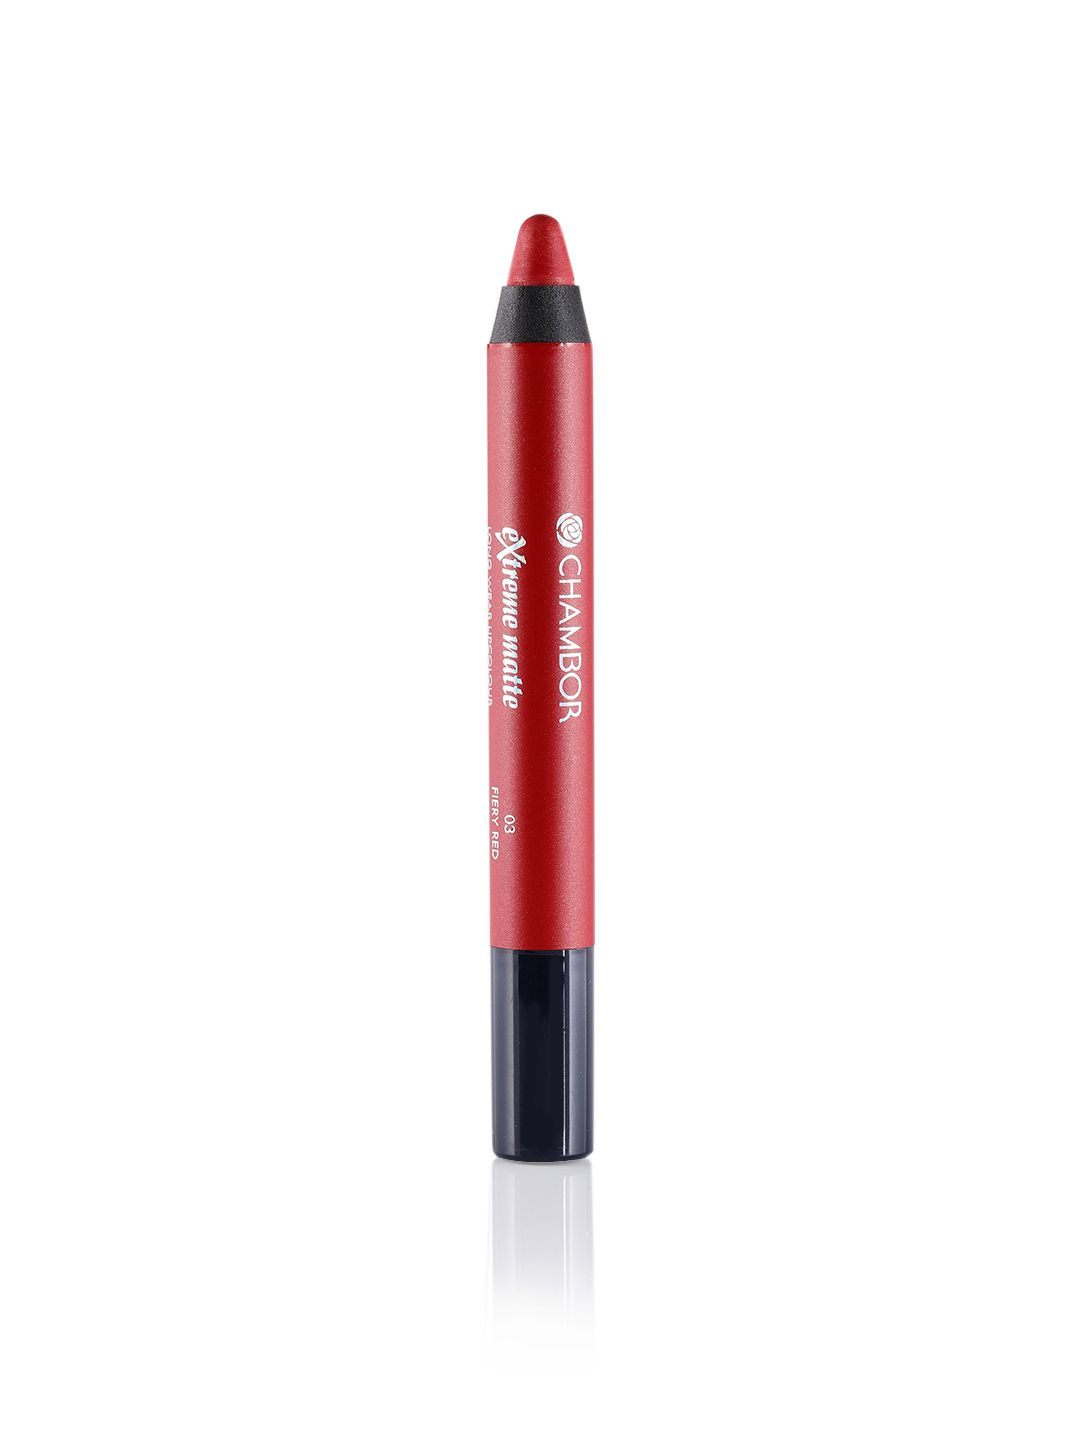 Chambor Fiery Red 03 Extreme Matte Long Wear Lip Colour Price in India